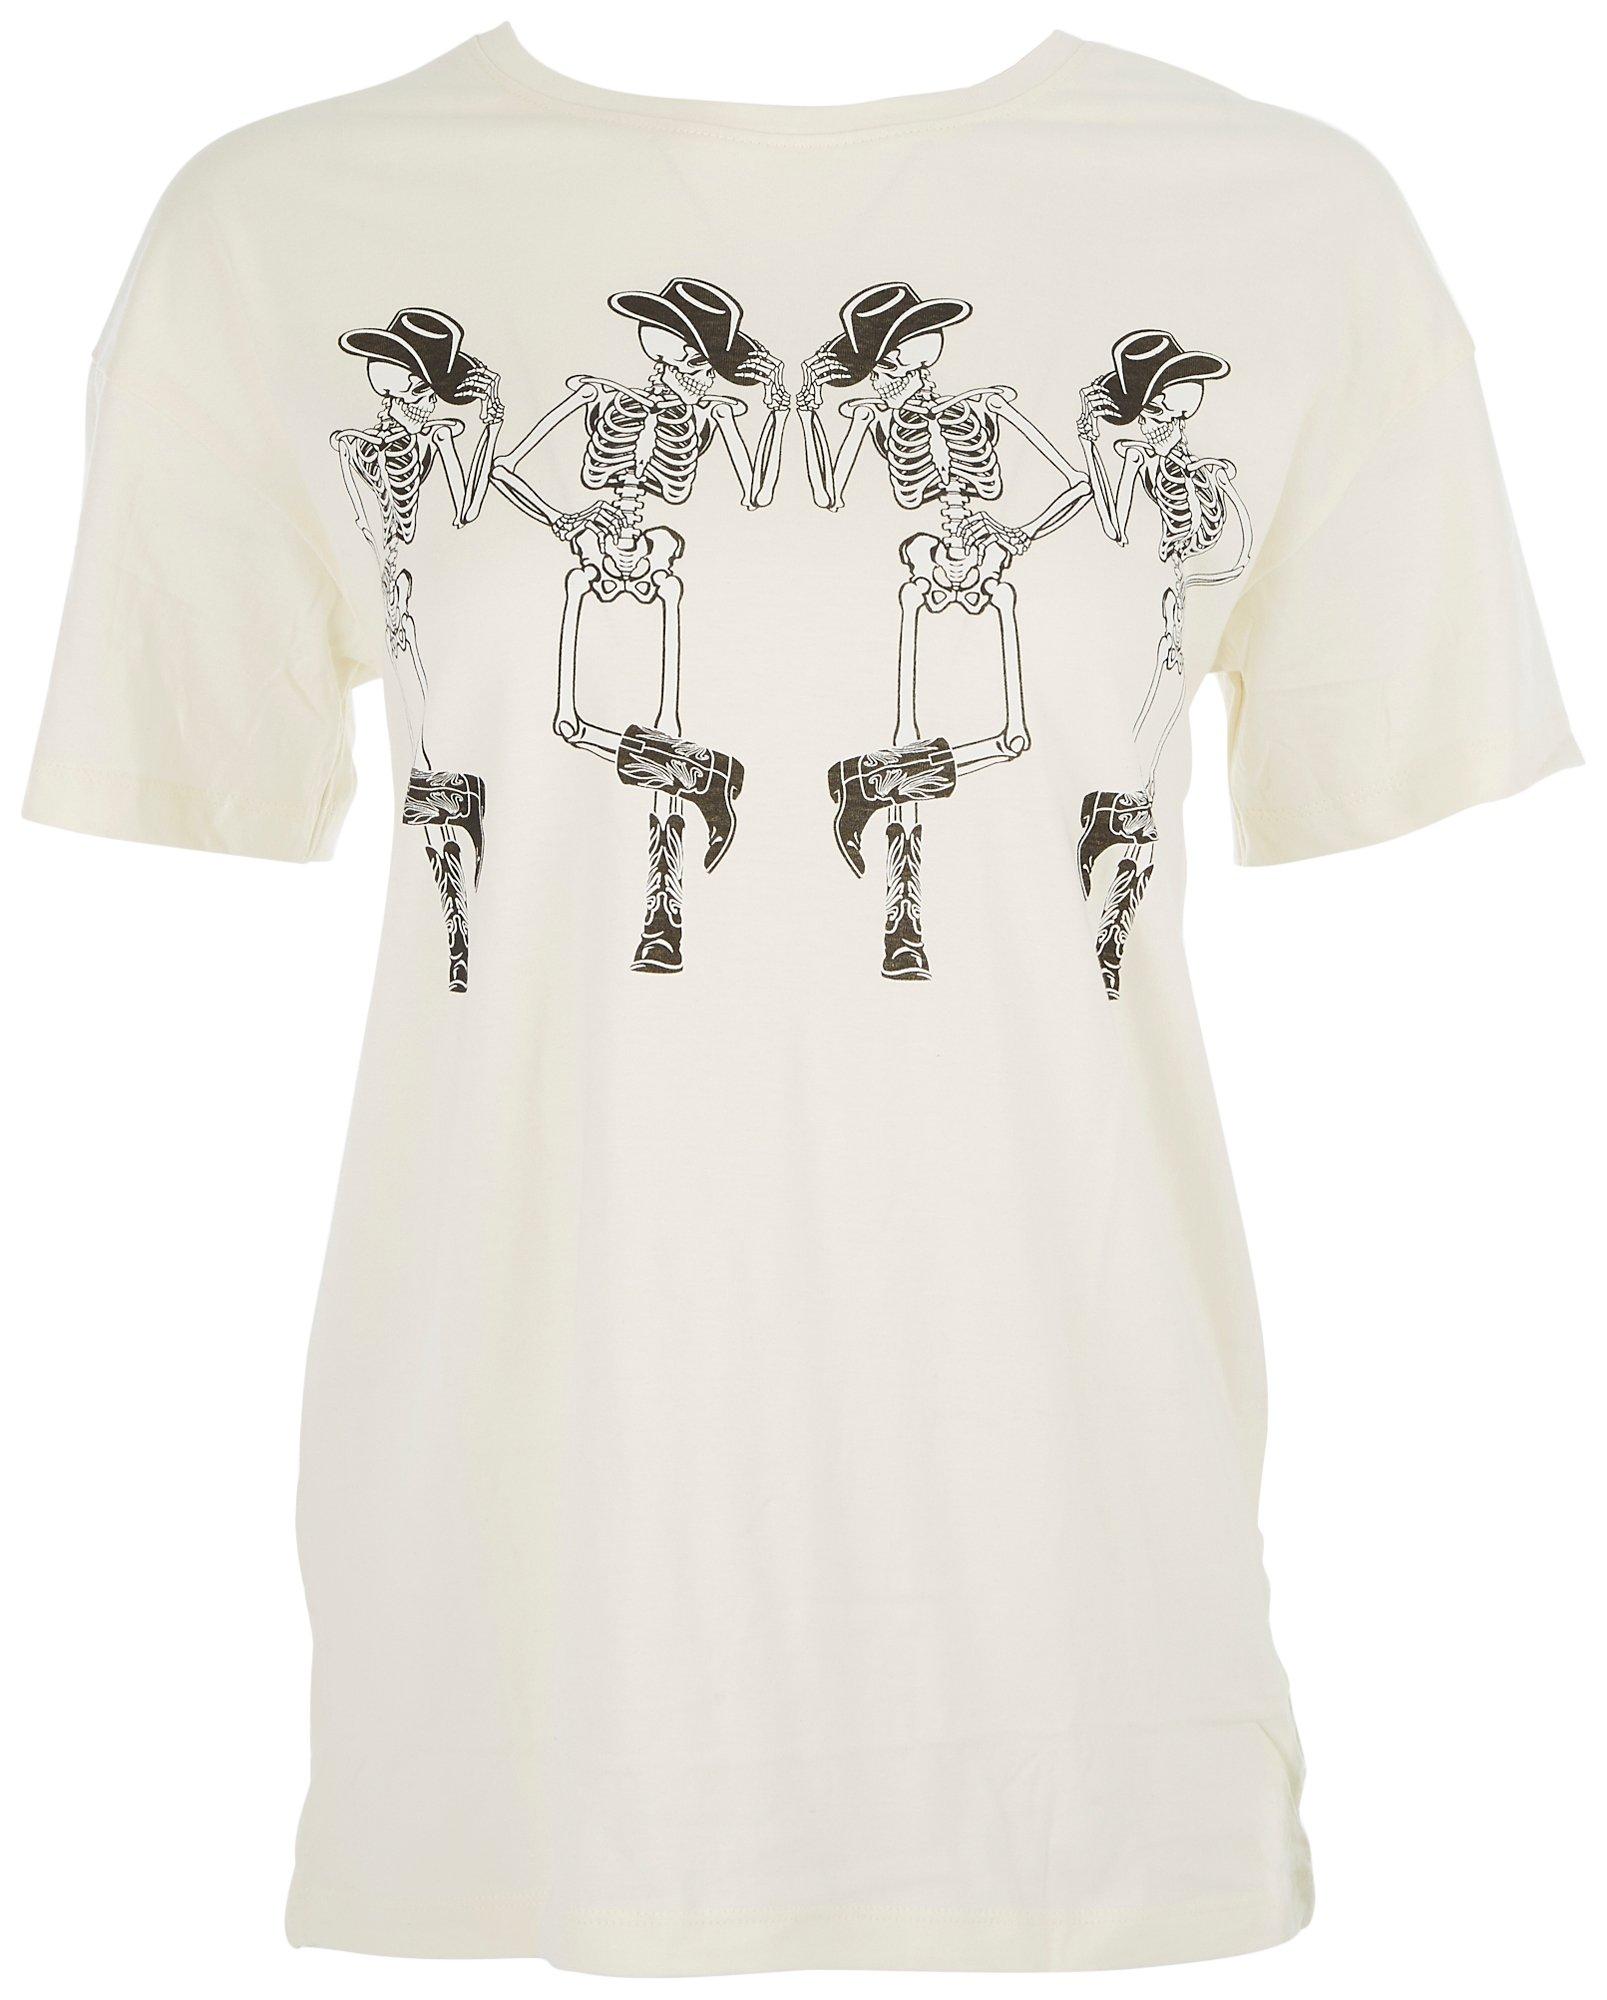 Messy Buns, Lazy Days Juniors Rodeo Skeletons T-shirt